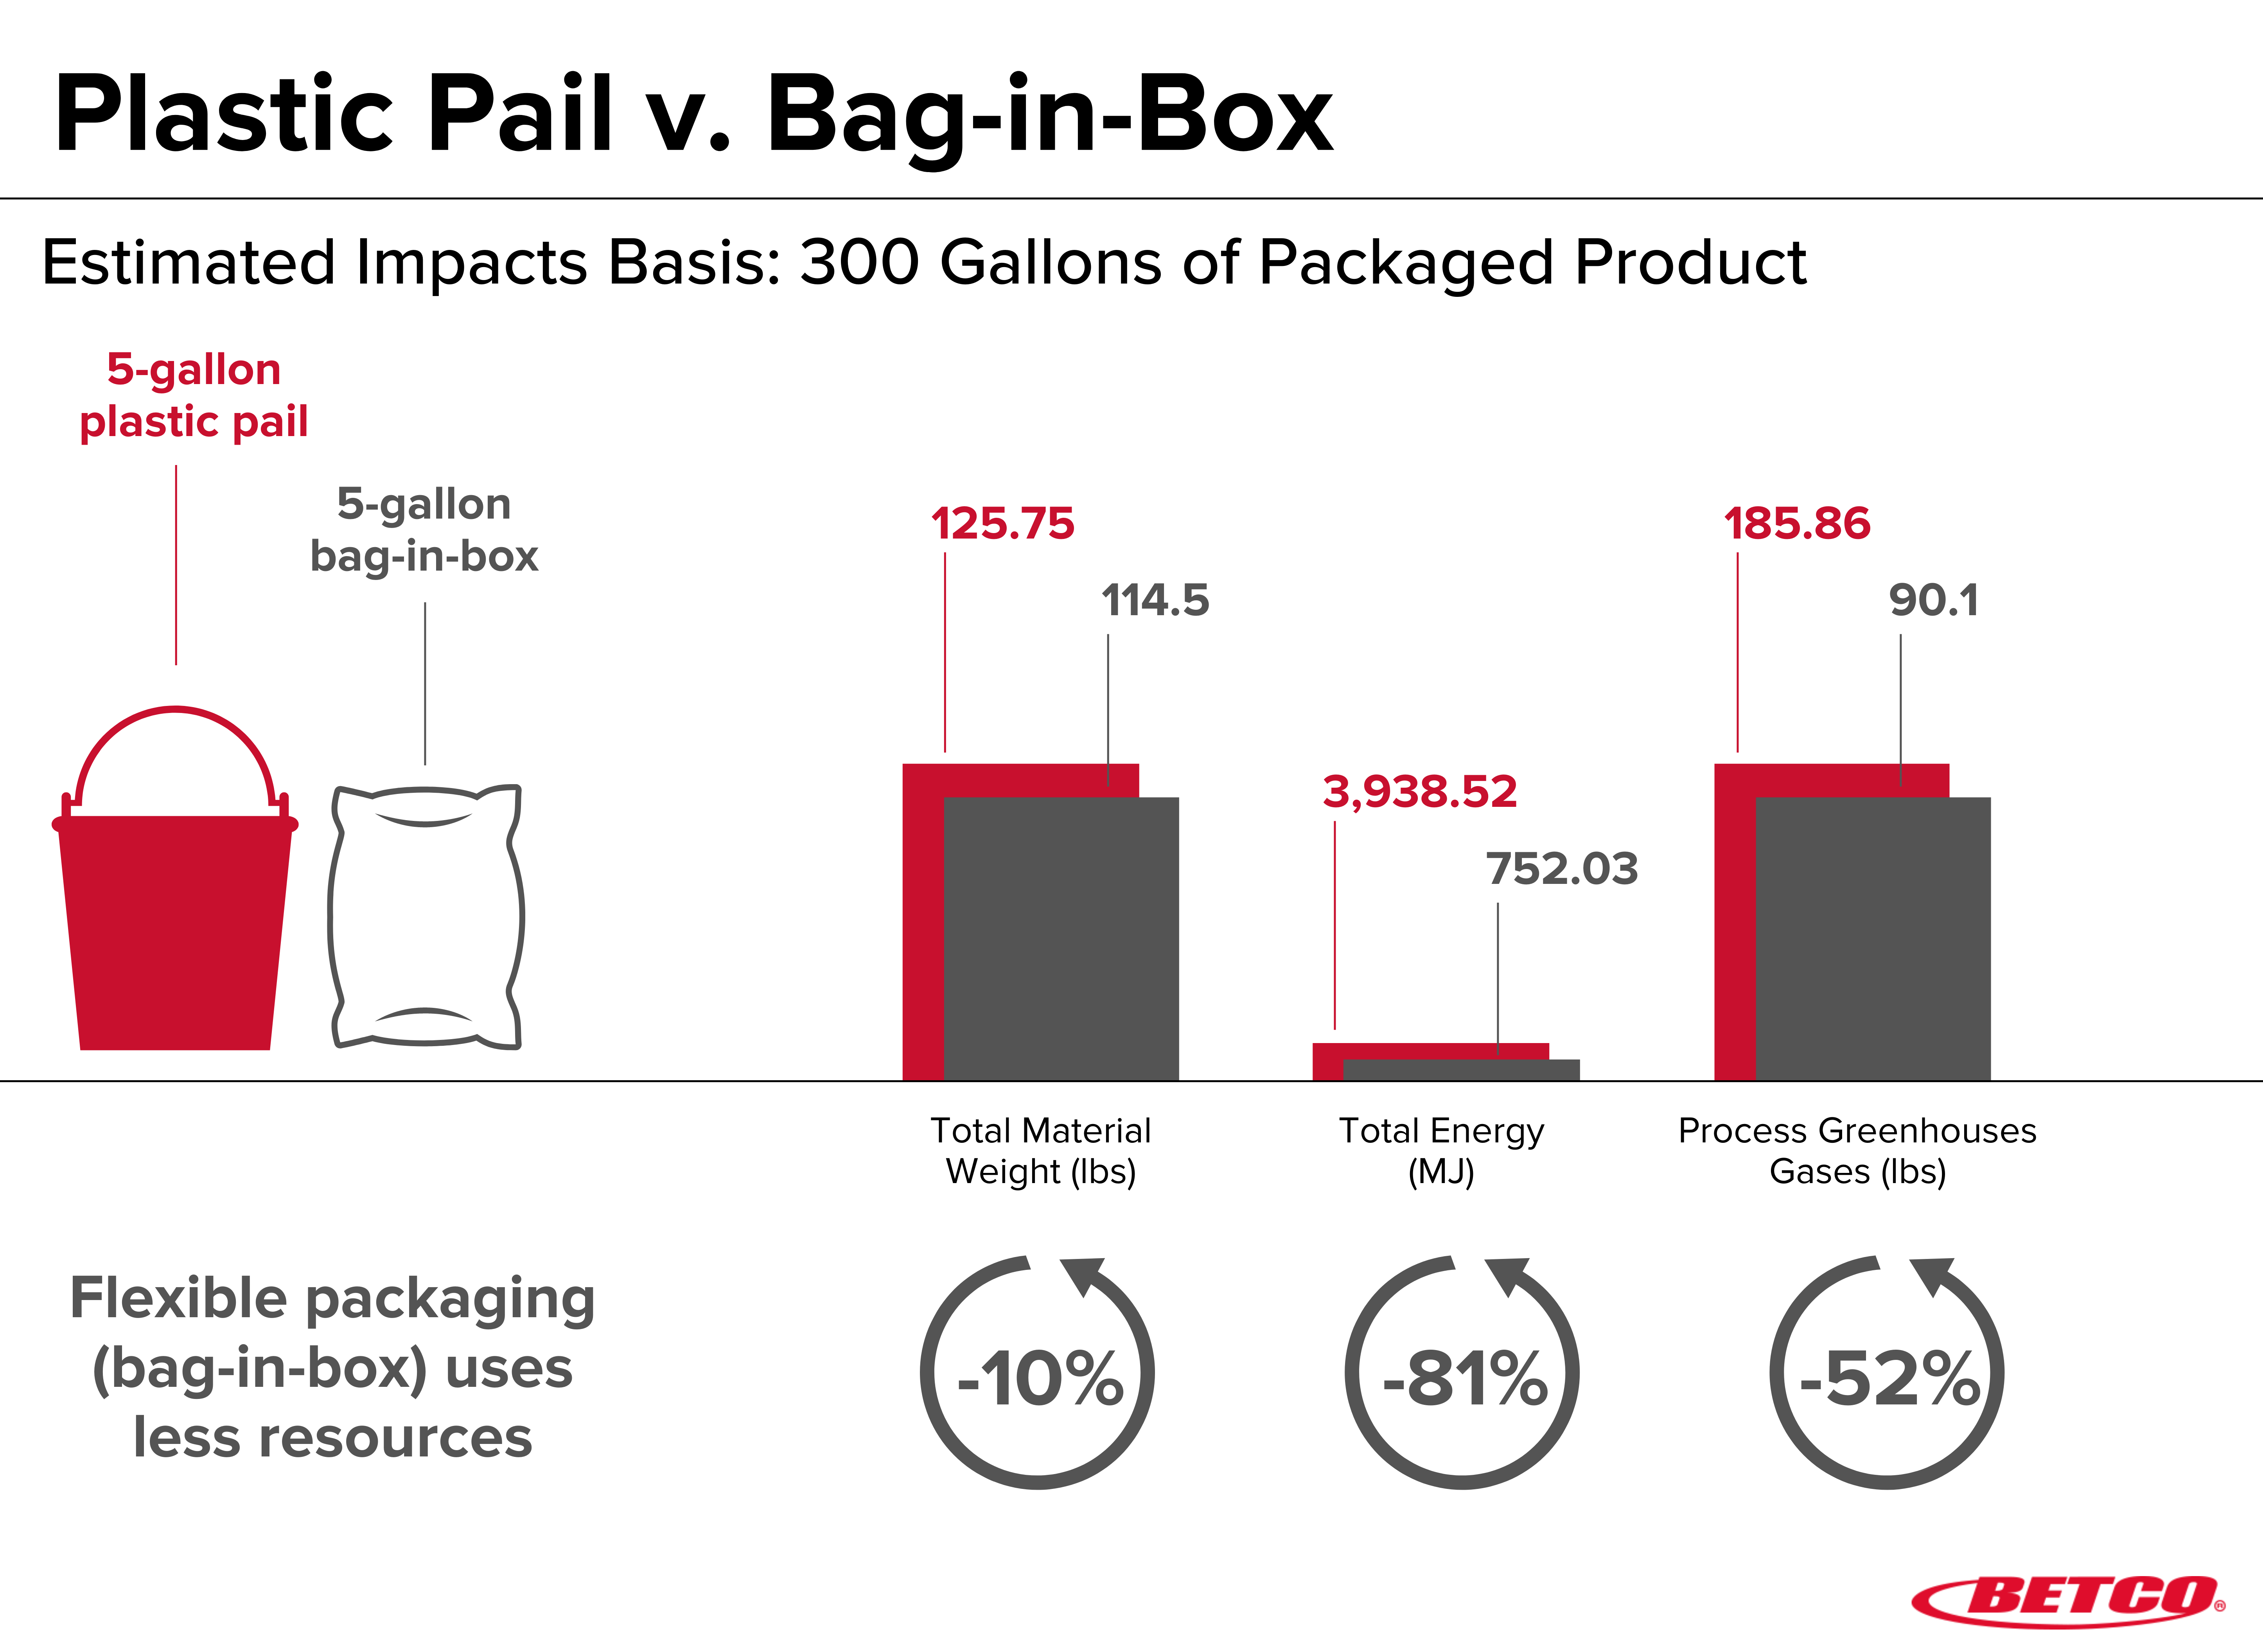 A graph comparing plastic pails and bag-in-box and their total material, energy, and process greenhouse gas. Bag-in-box has lower numbers. 